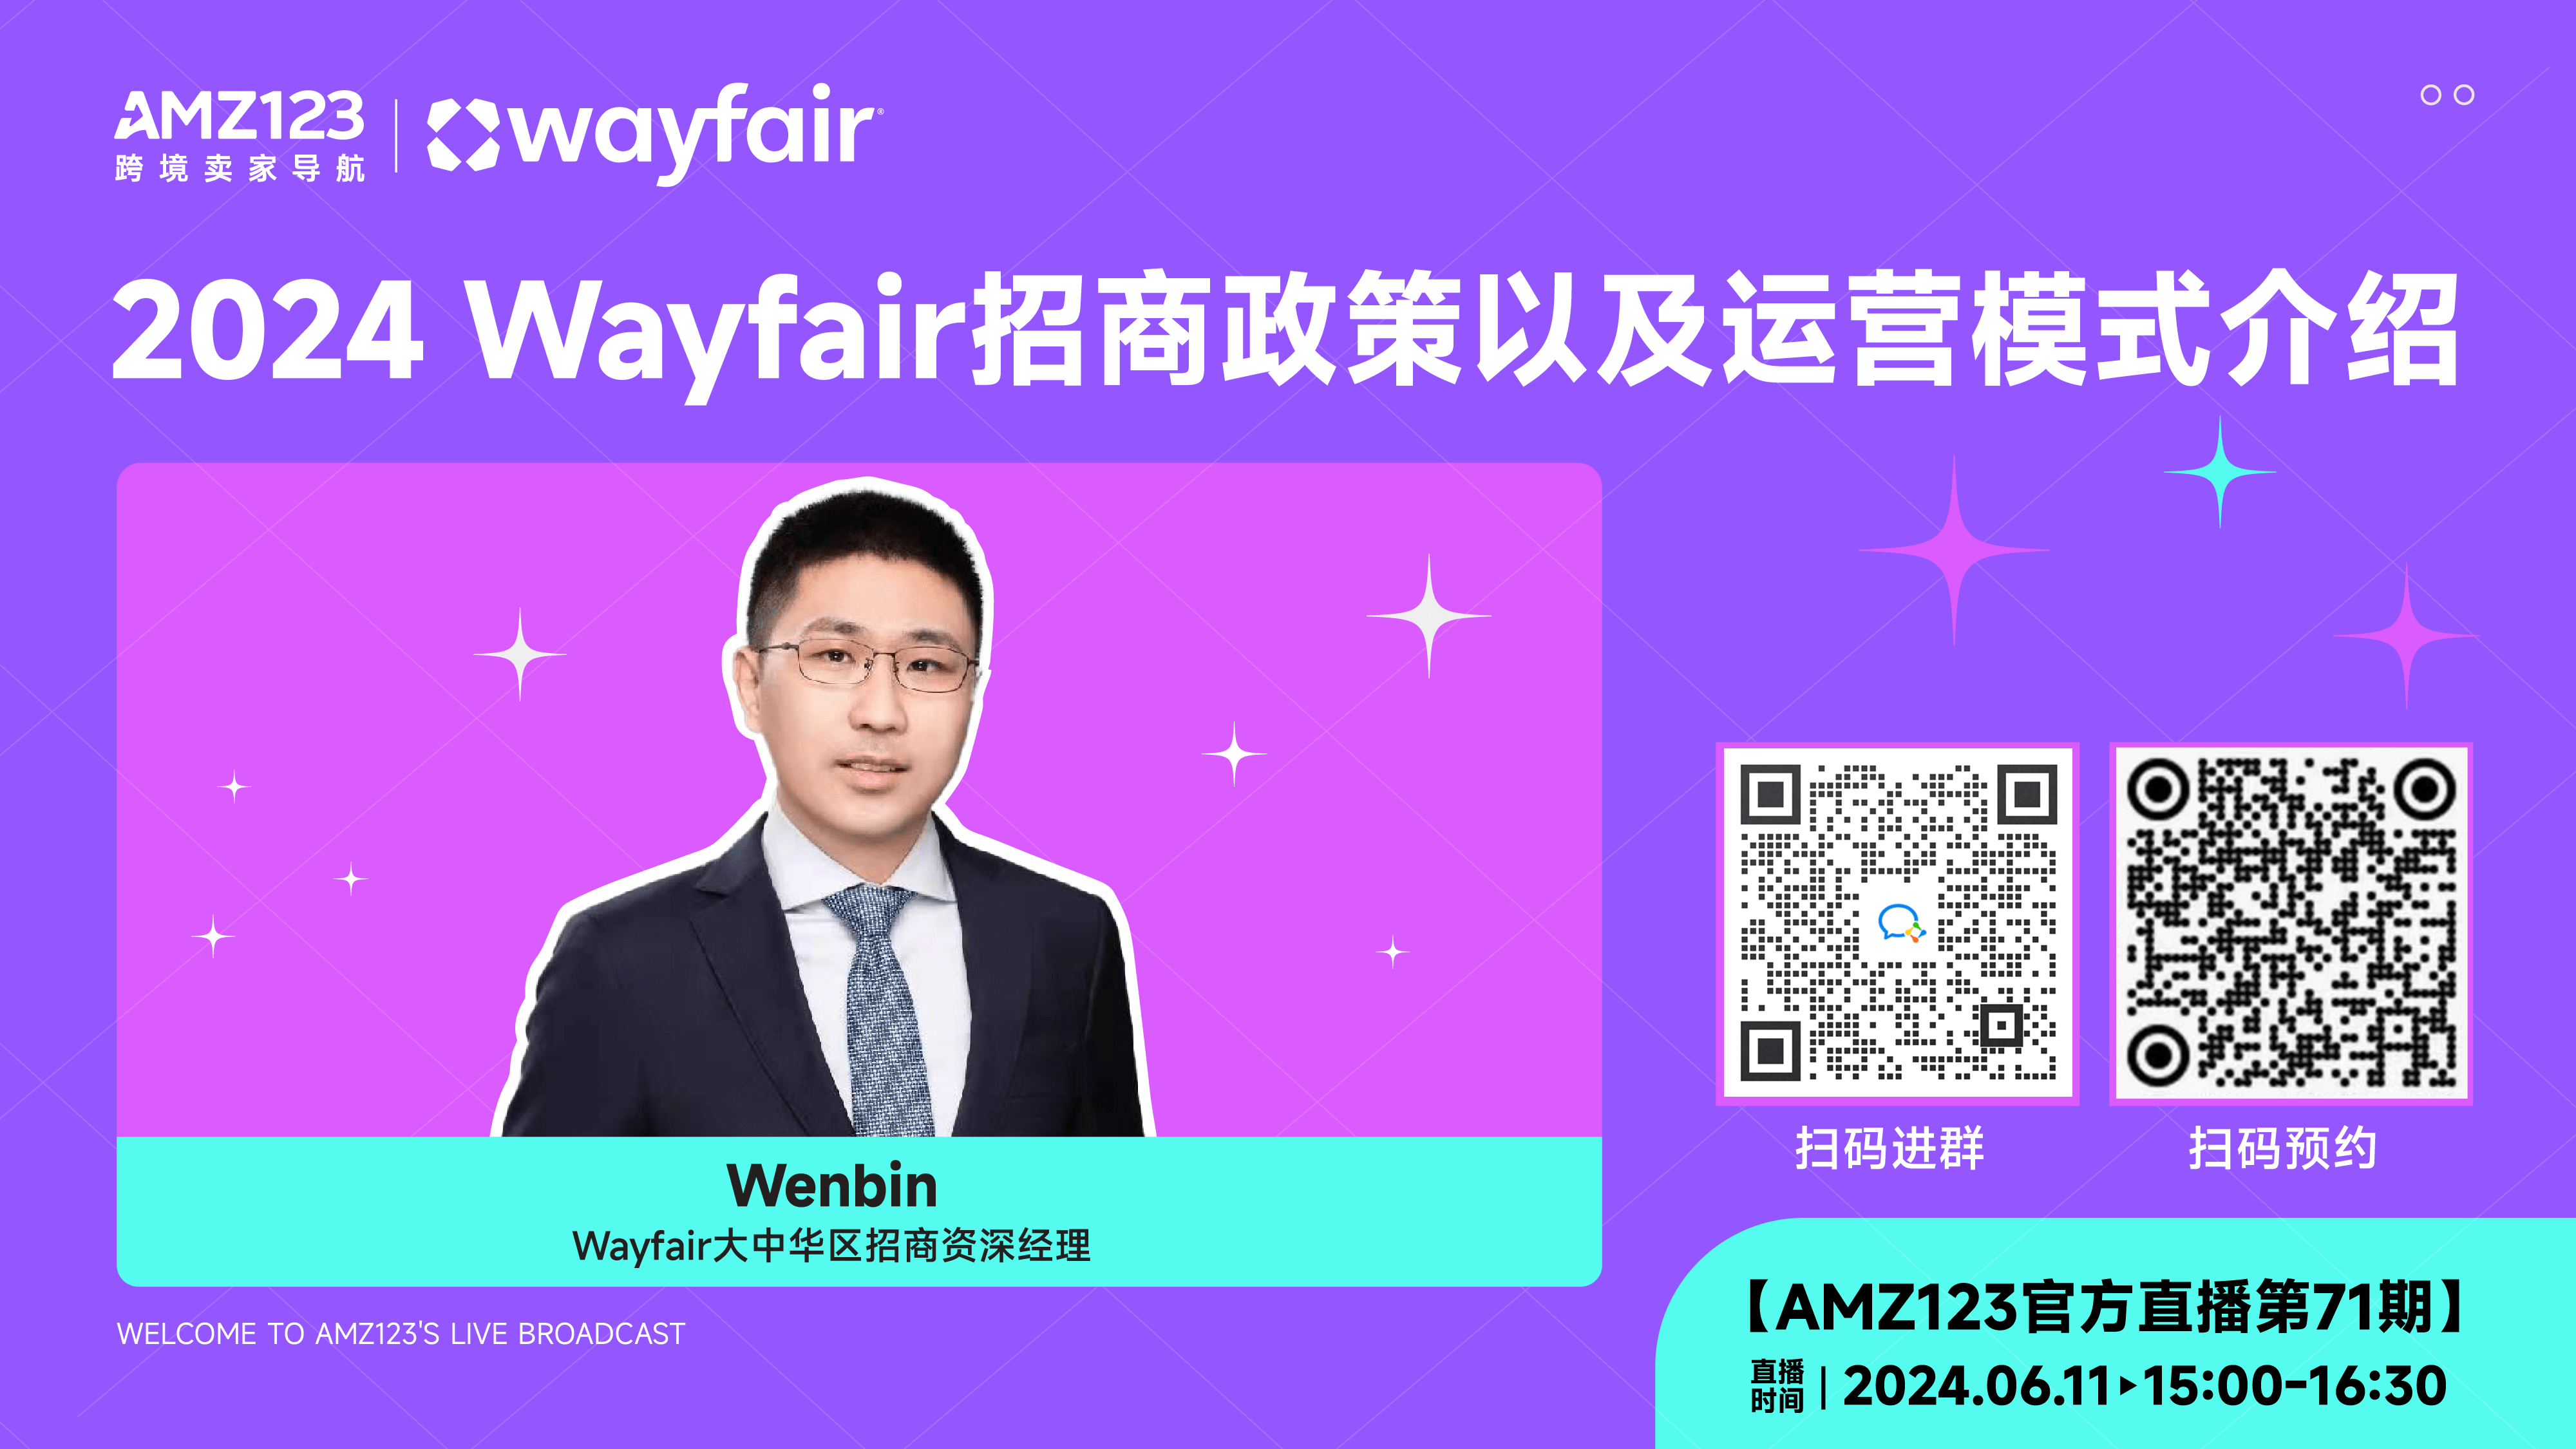  2024 Wayfair takes you to the sea to win the future! Detailed explanation of Wayfair's latest settlement policy